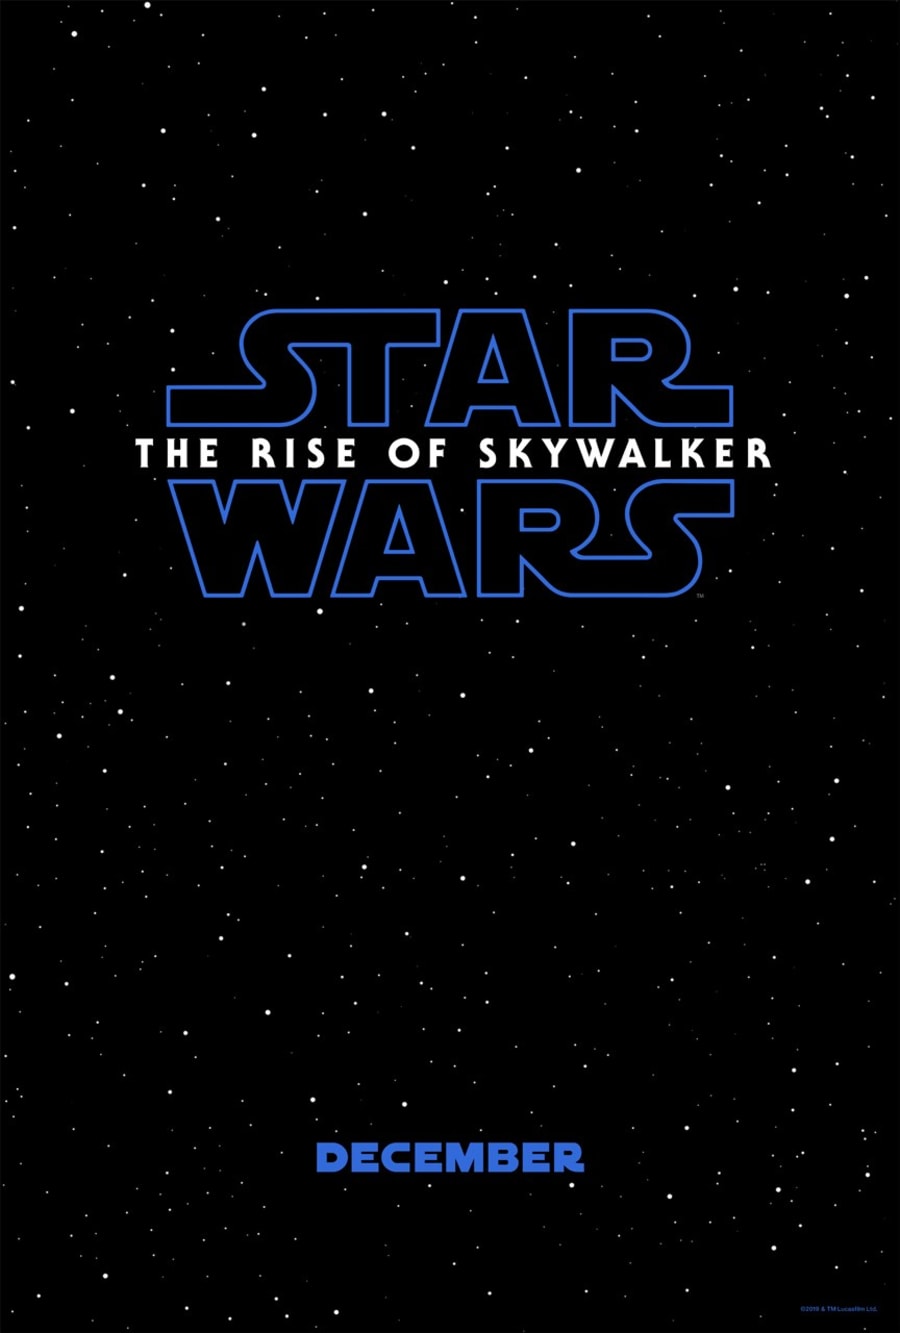 The Epic Premiere of Star Wars: The Rise of Skywalker Was a